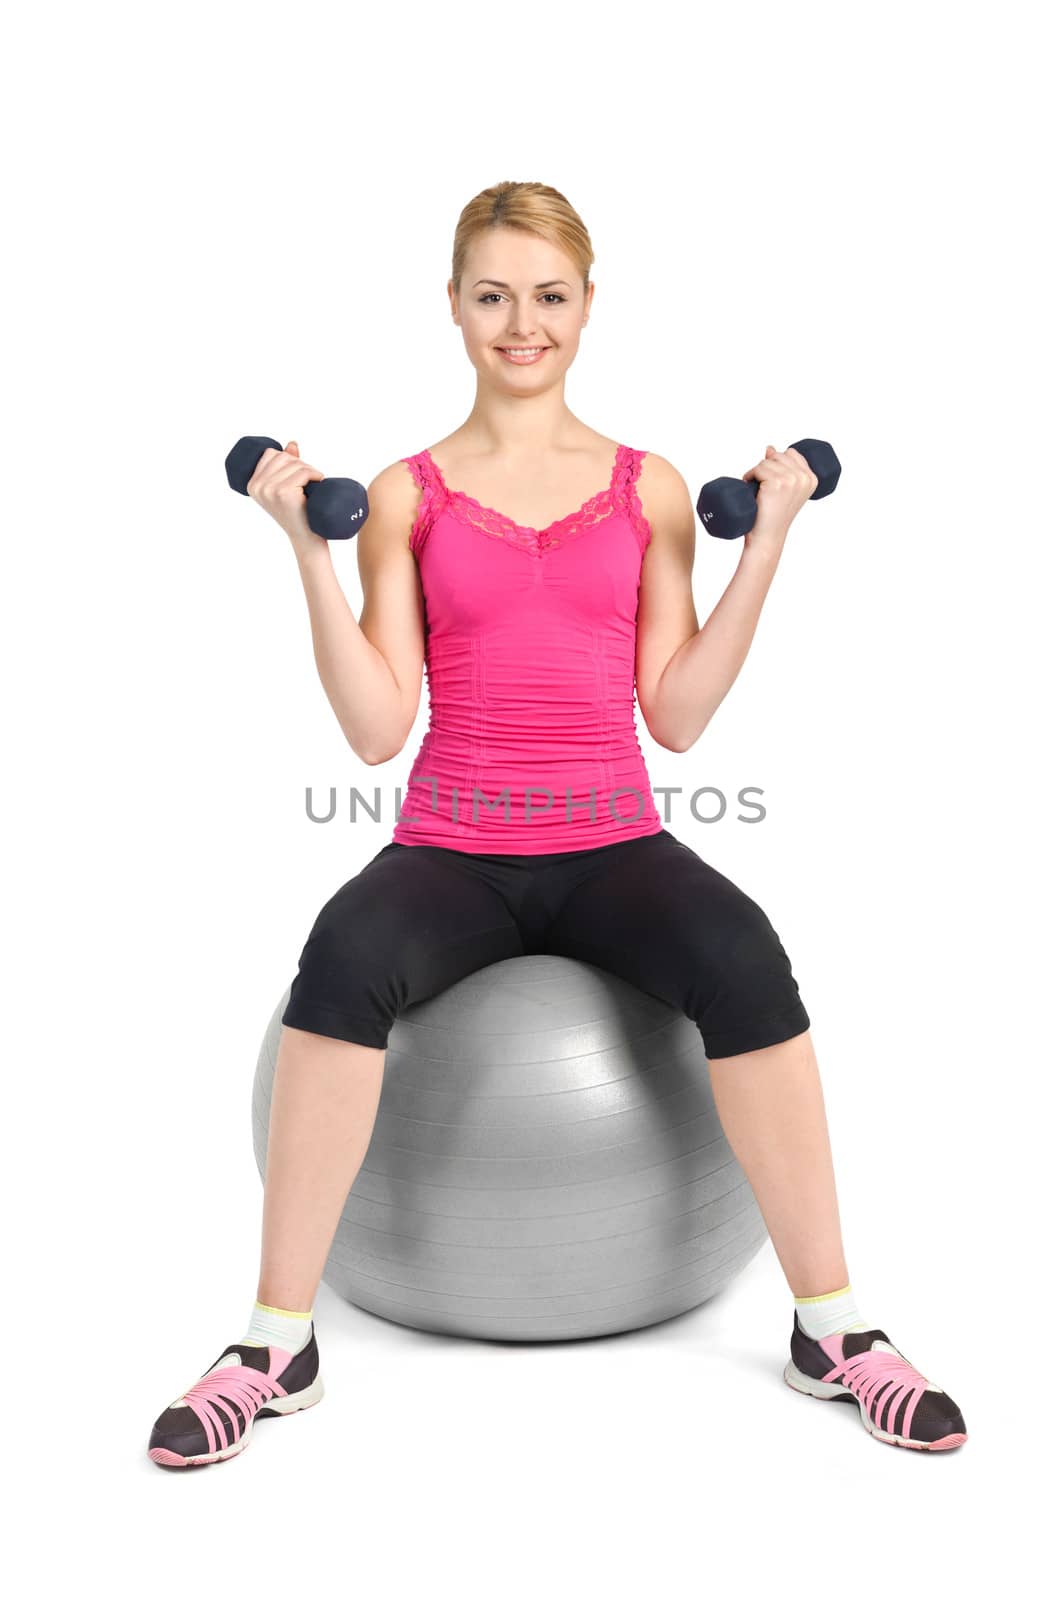 young woman posing with dumbbells sitting on fitness ball, on white background